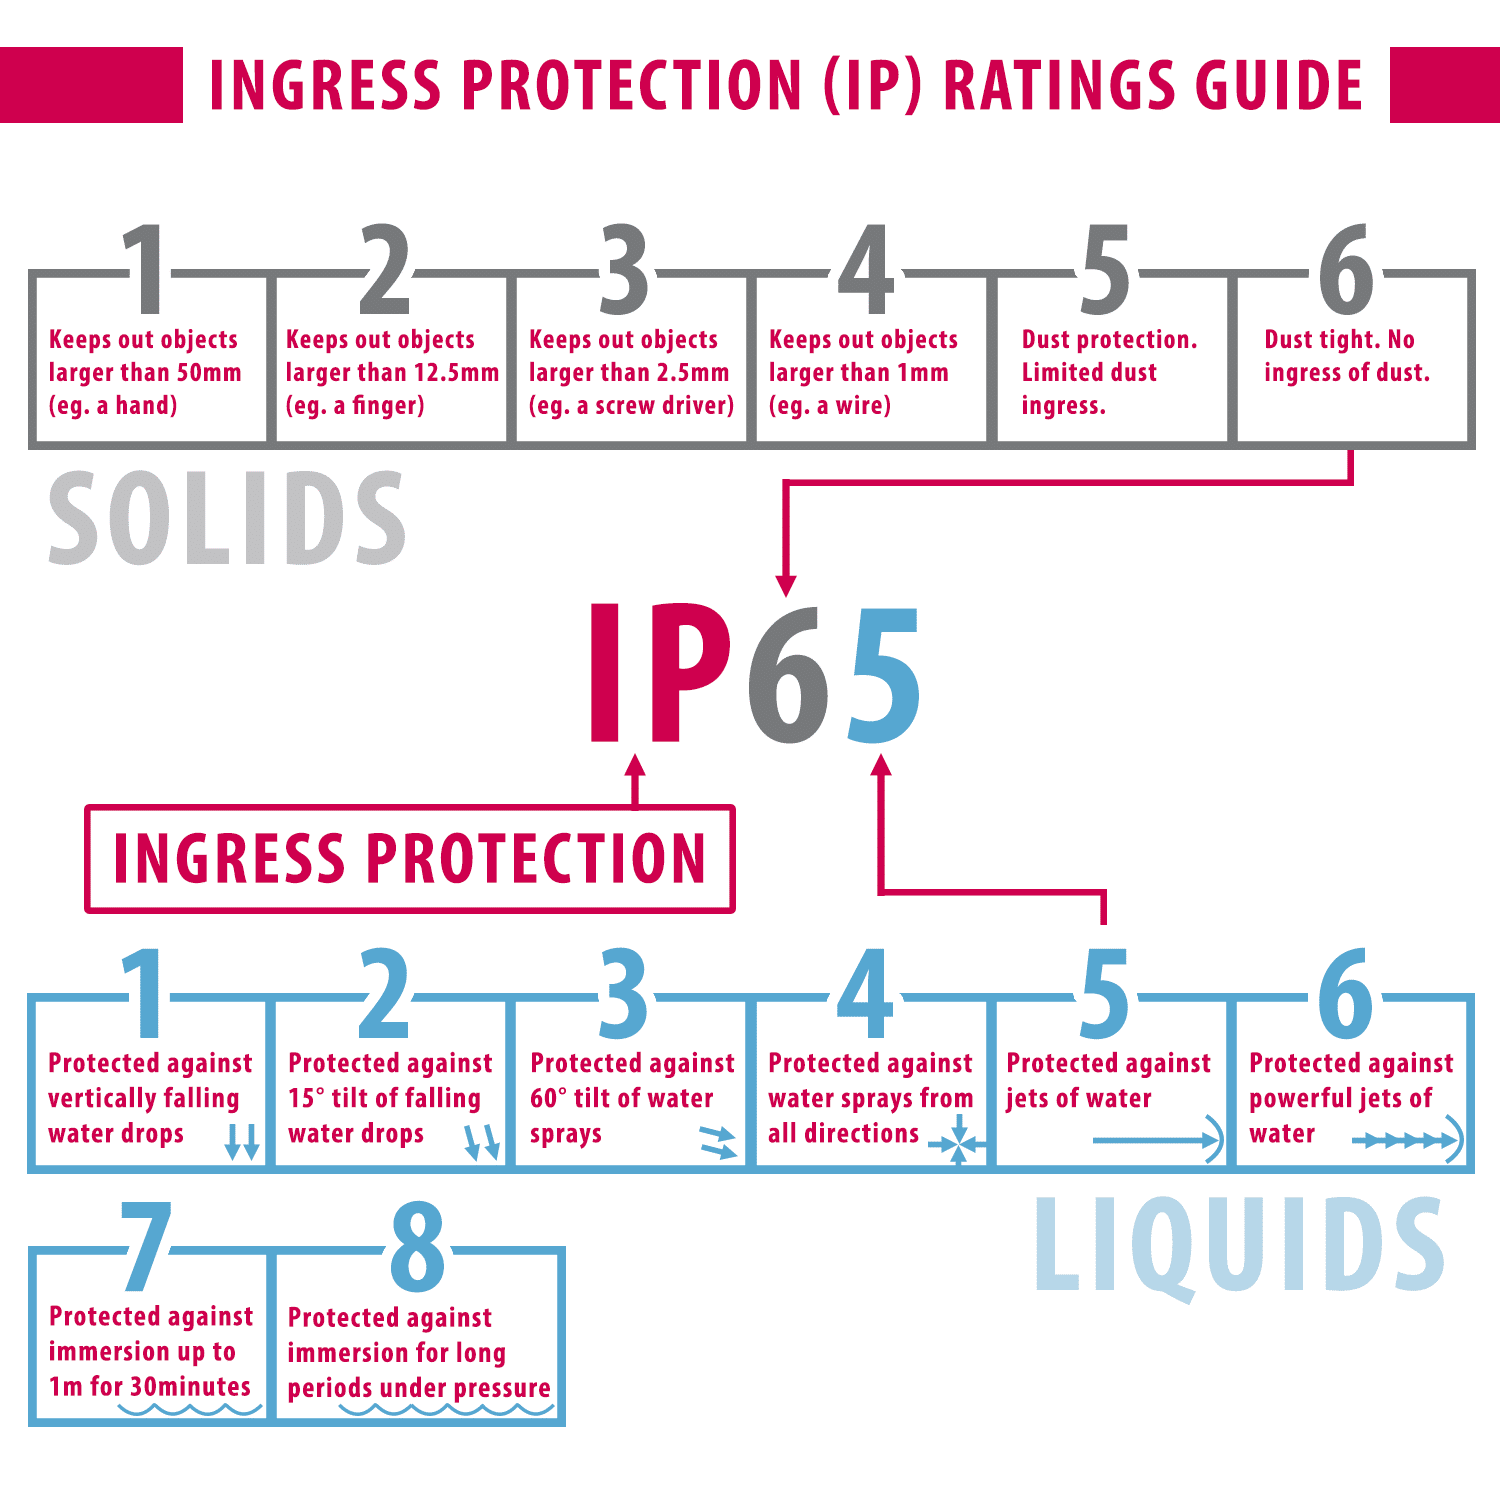 Reference guide to show how the IP rating is used for categorizing ingress protection against solids and liquids